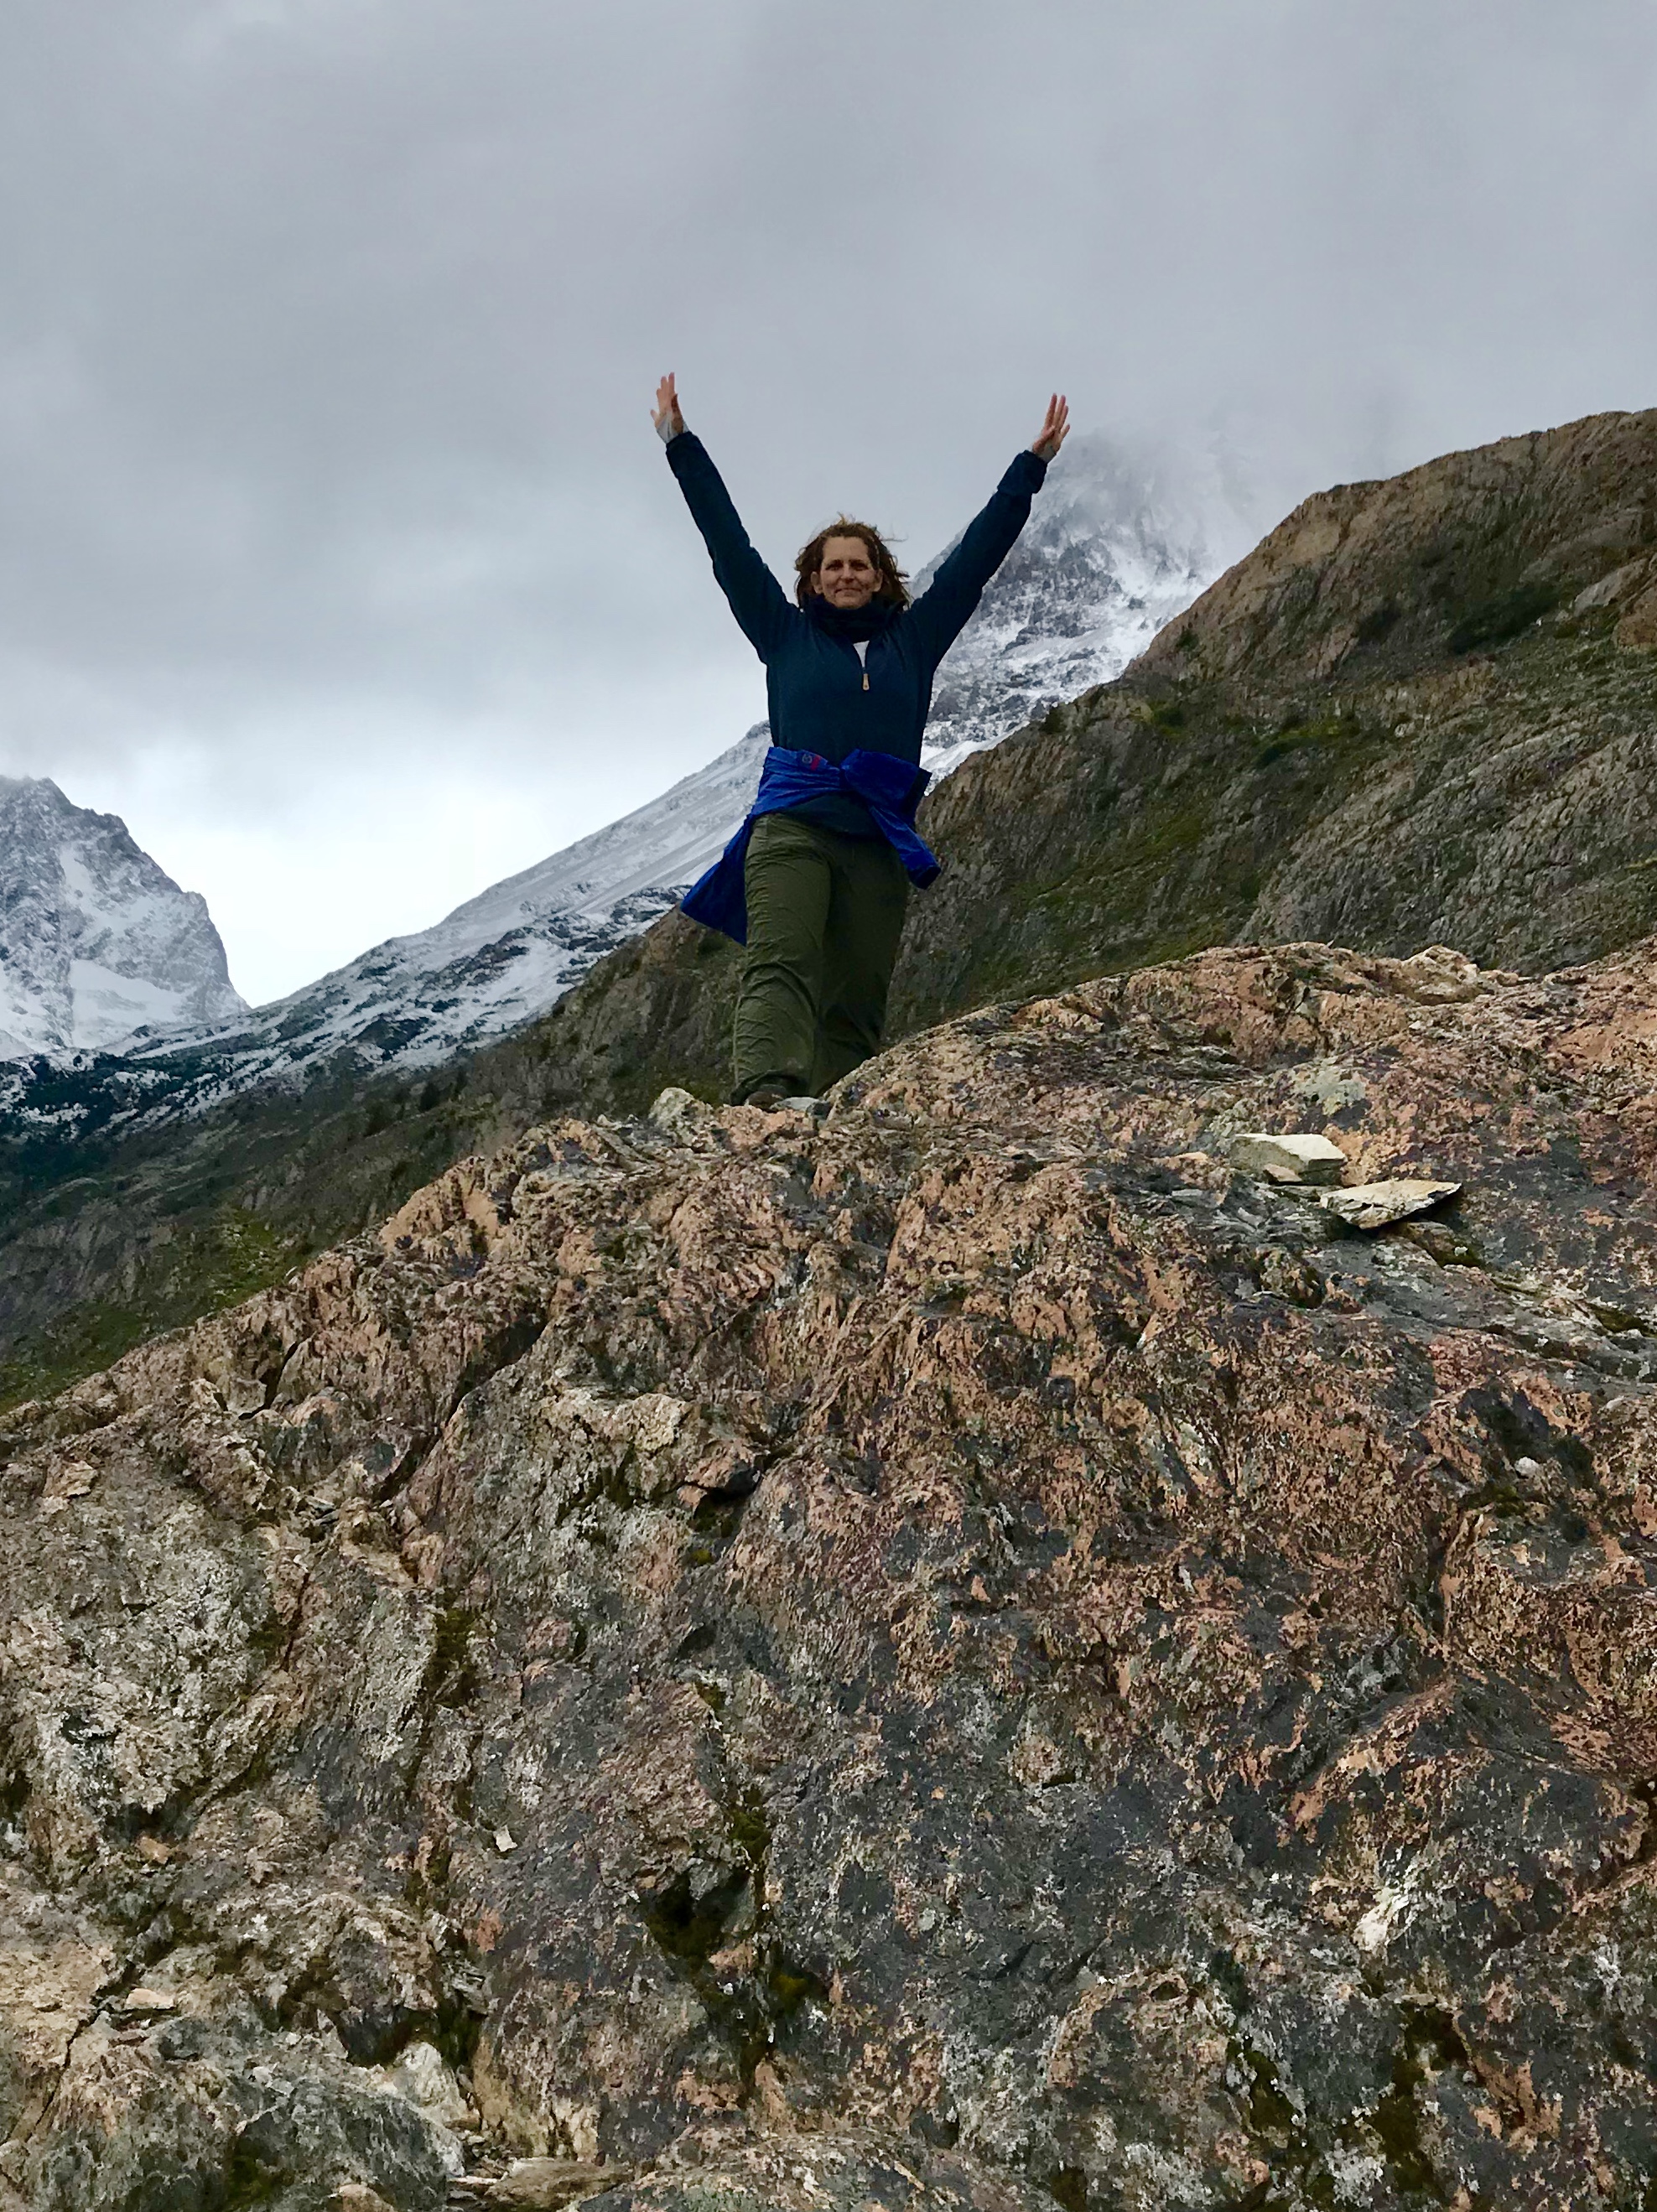 climbing to the top of the mountain in Patagonia